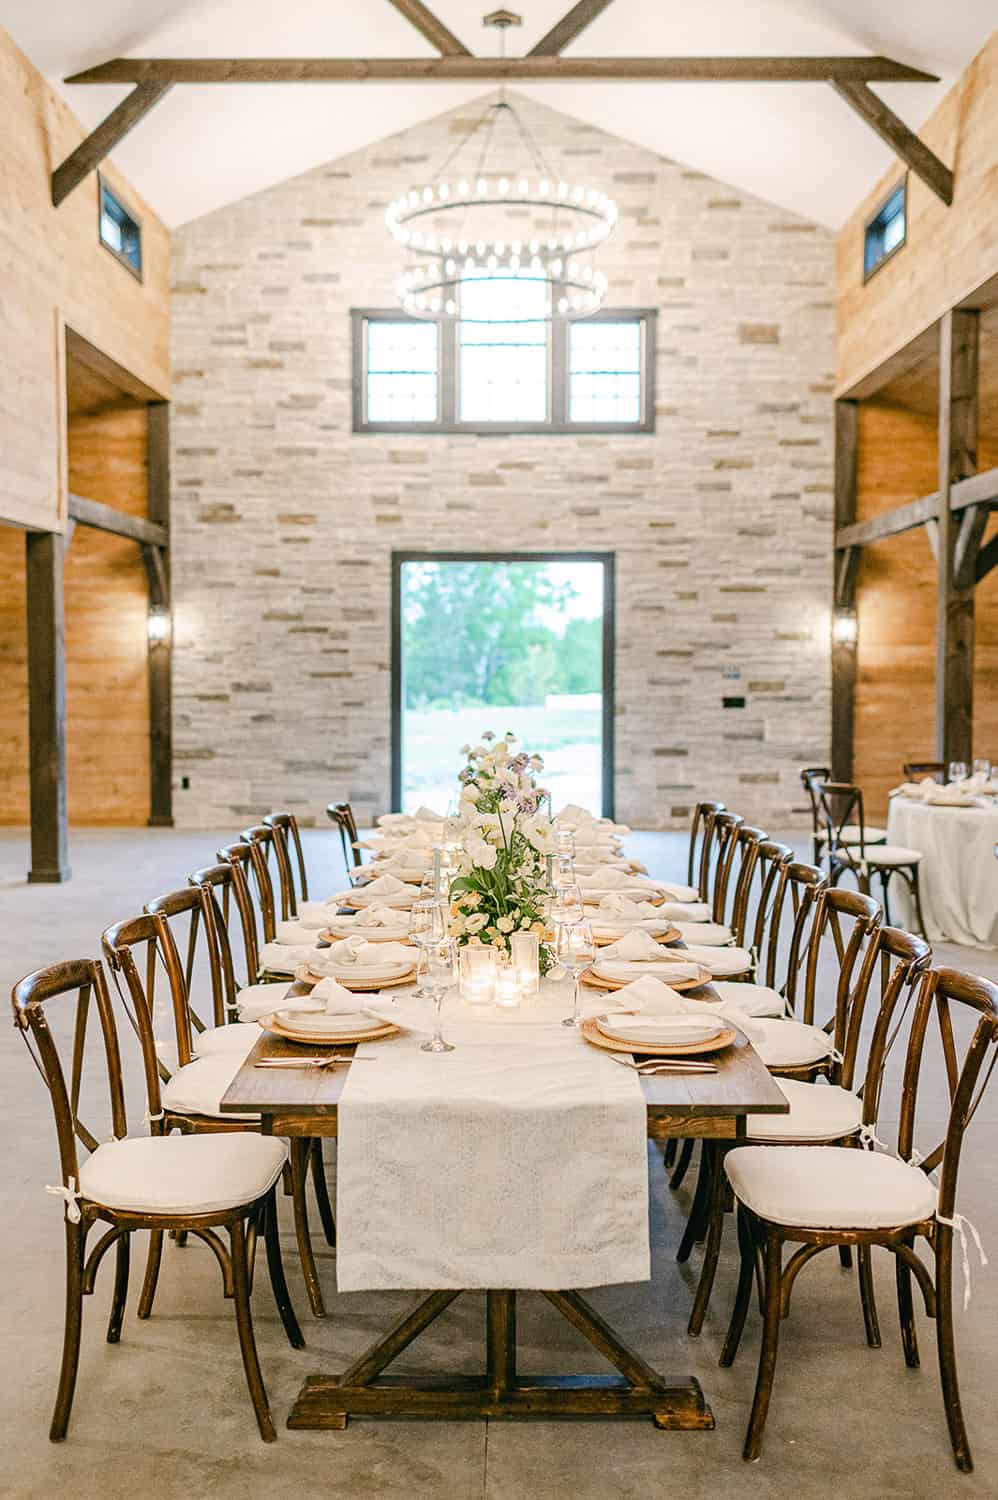 Elegant table inside a spacious hall with chairs, white dinnerware, and a central floral centerpiece, all under a rustic chandelier.